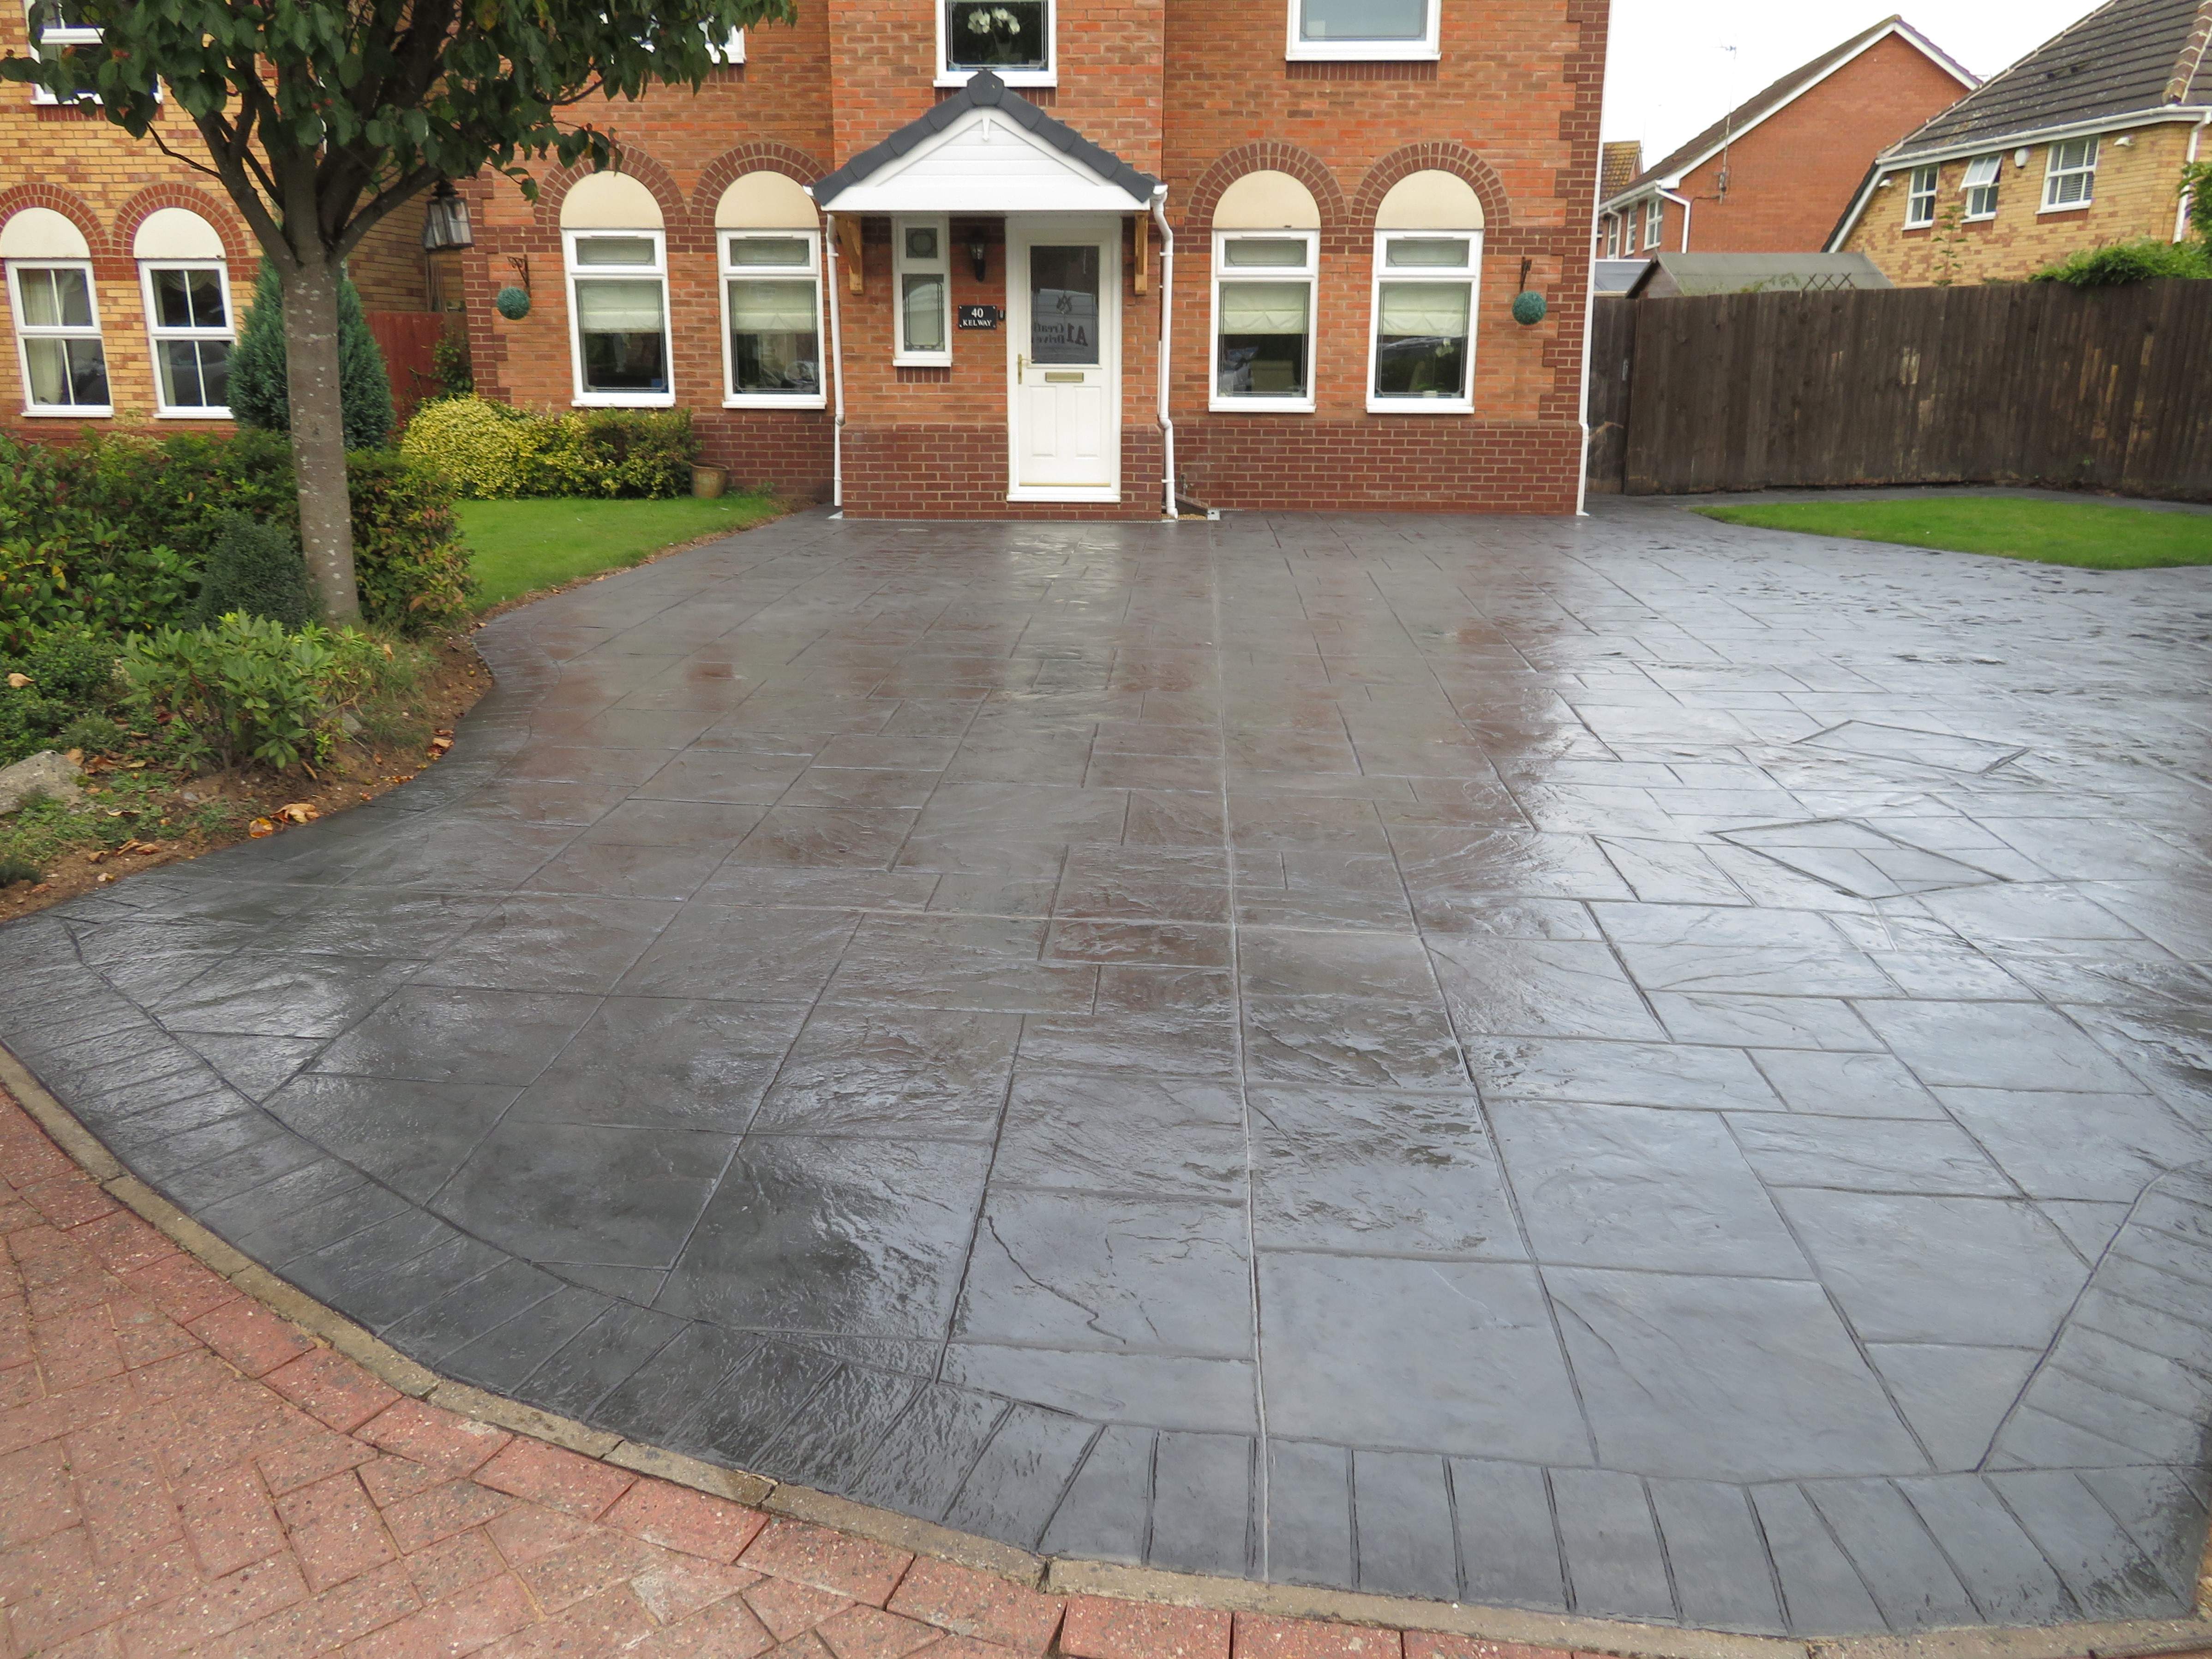 Pattern Imprinted Concrete Driveway done in Ashlar Pattern with Brick Boarder